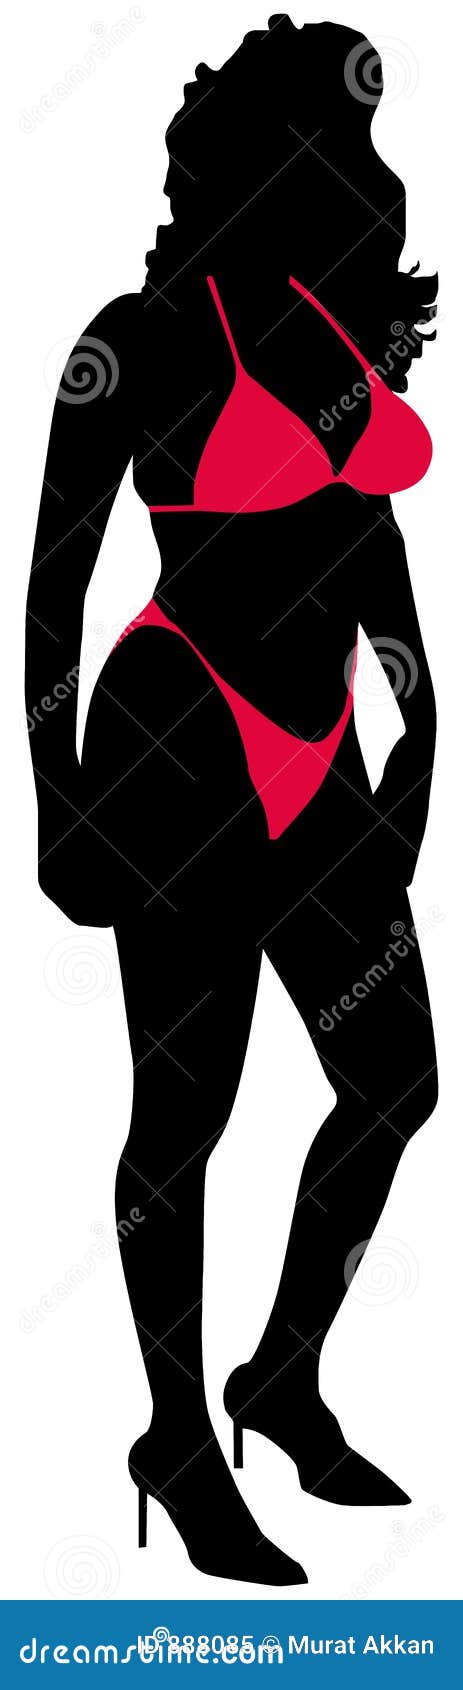 Monochrome Silhouette Of Woman With Swimsuit Bra And Top Knot In Chest  Vector Illustration. Royalty Free SVG, Cliparts, Vectors, and Stock  Illustration. Image 76185030.